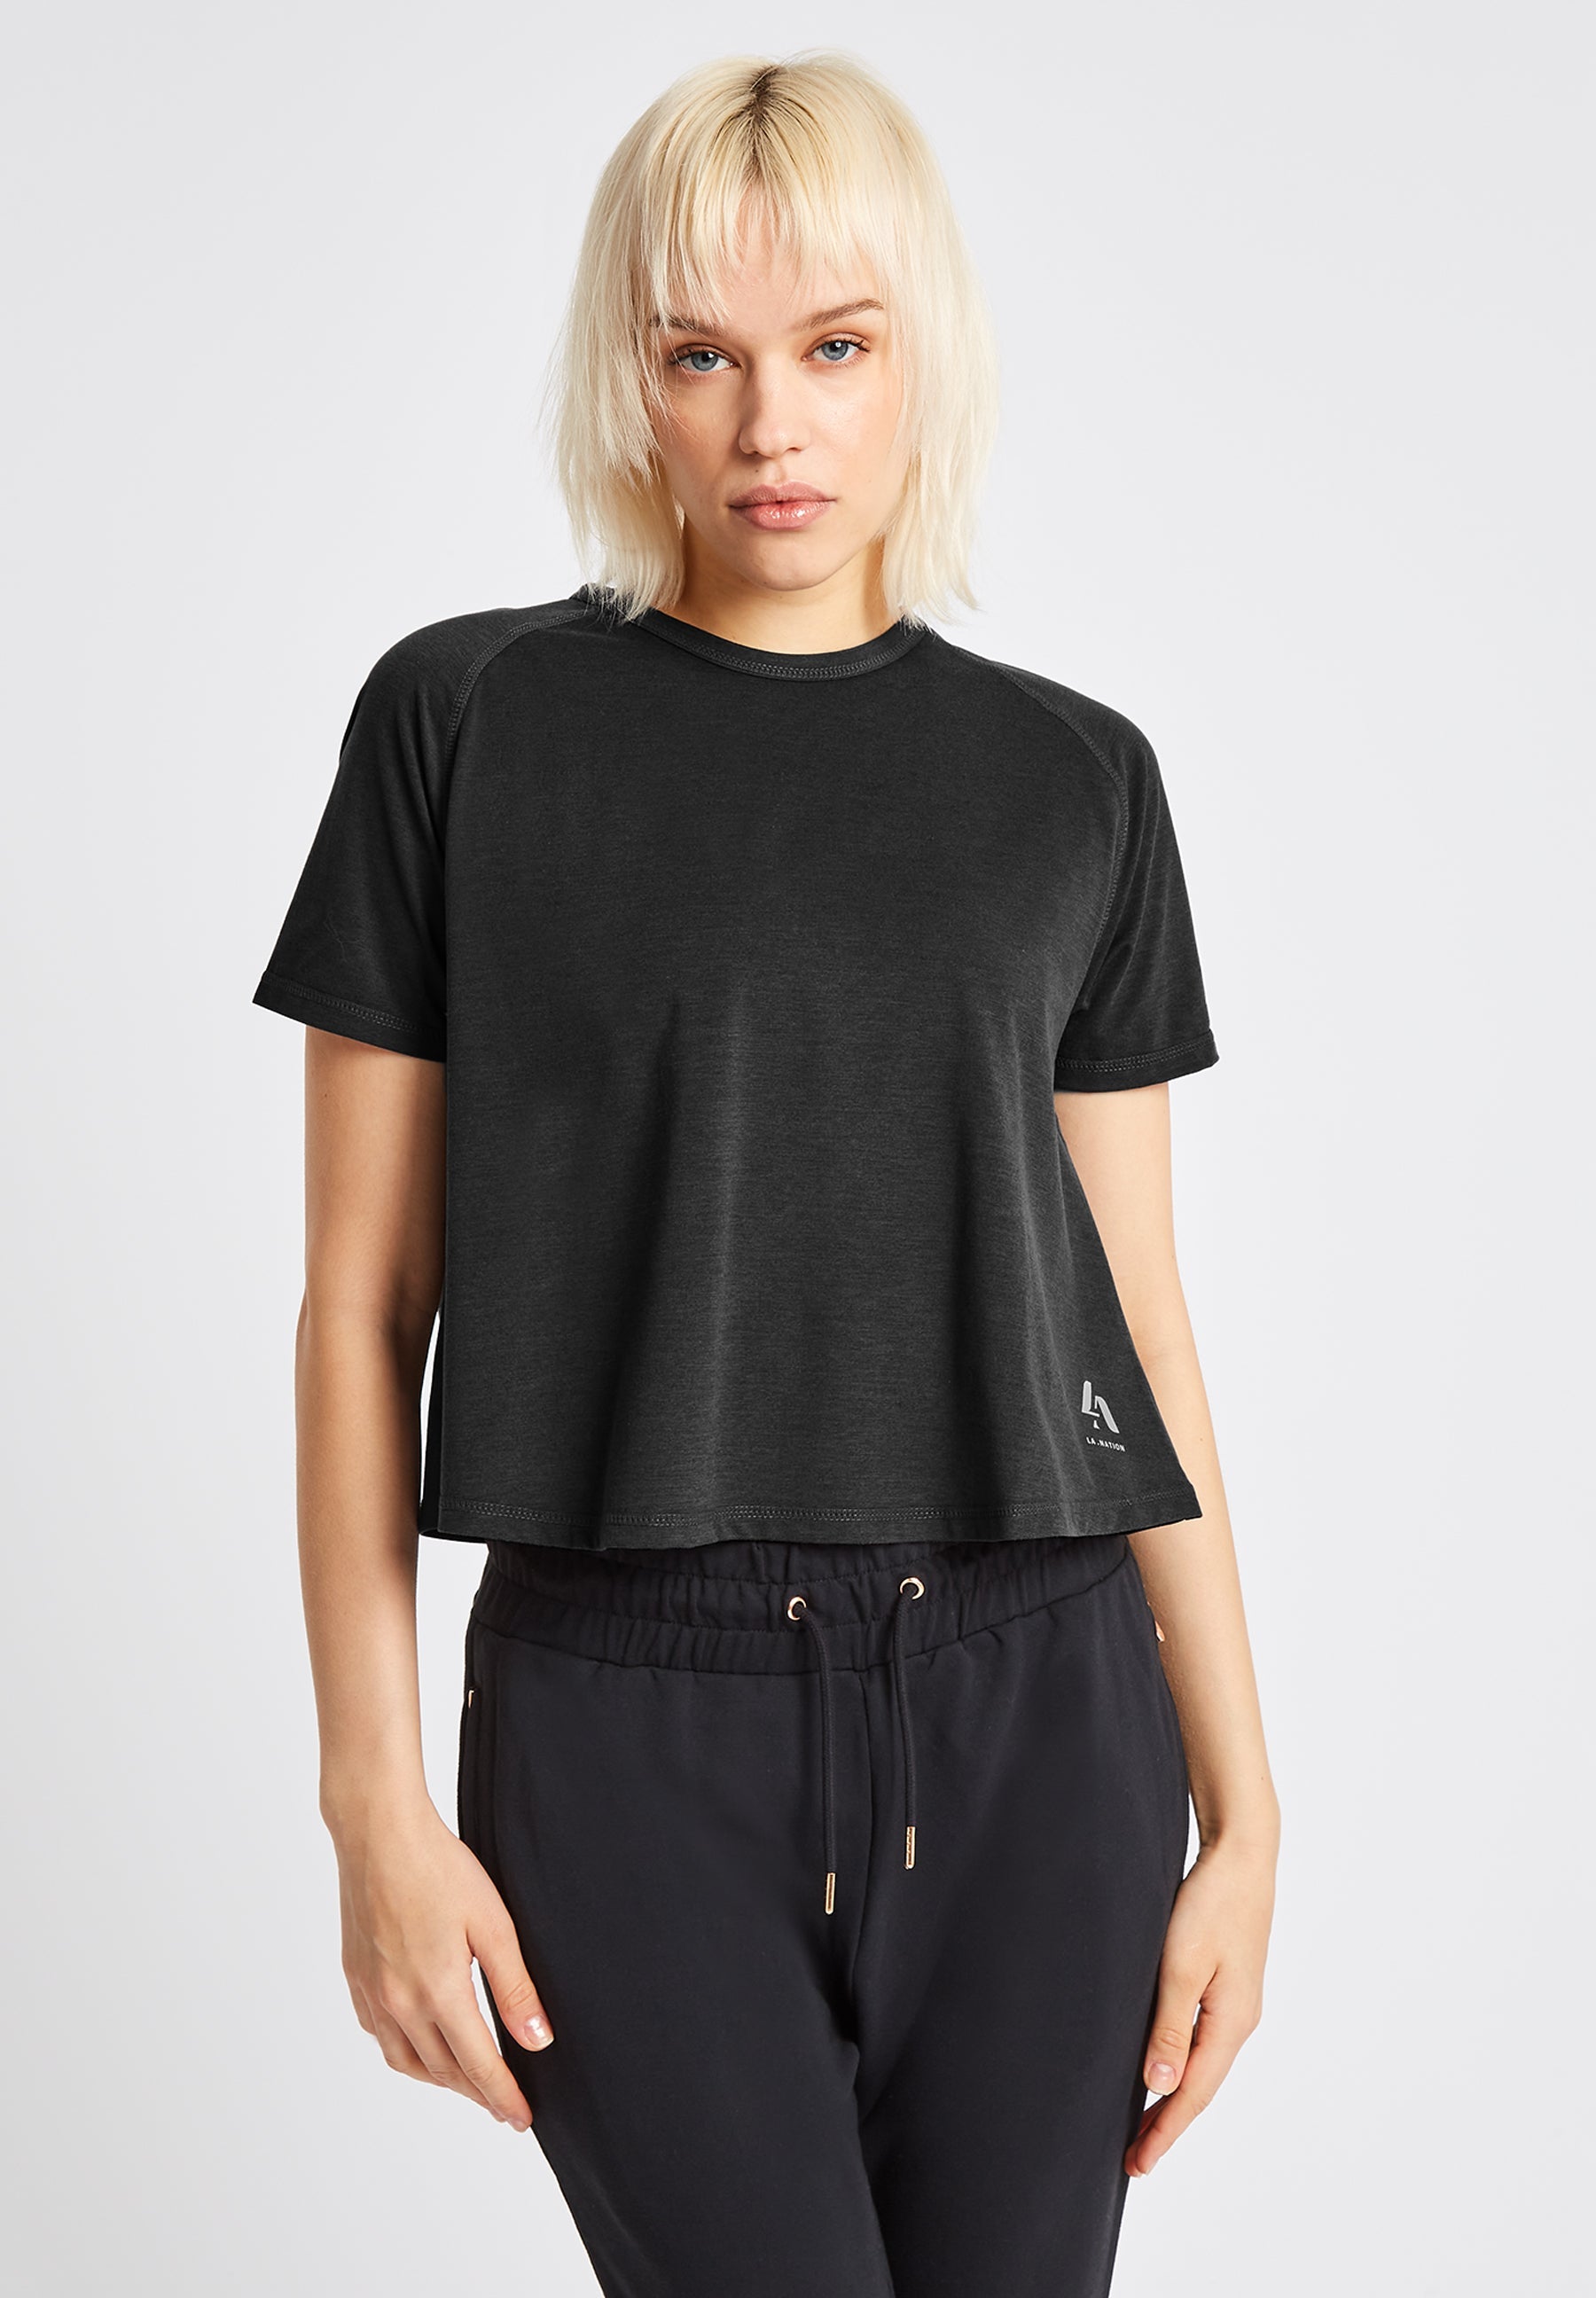 Short Sleeve T-Shirt With Cross Over Back-Black